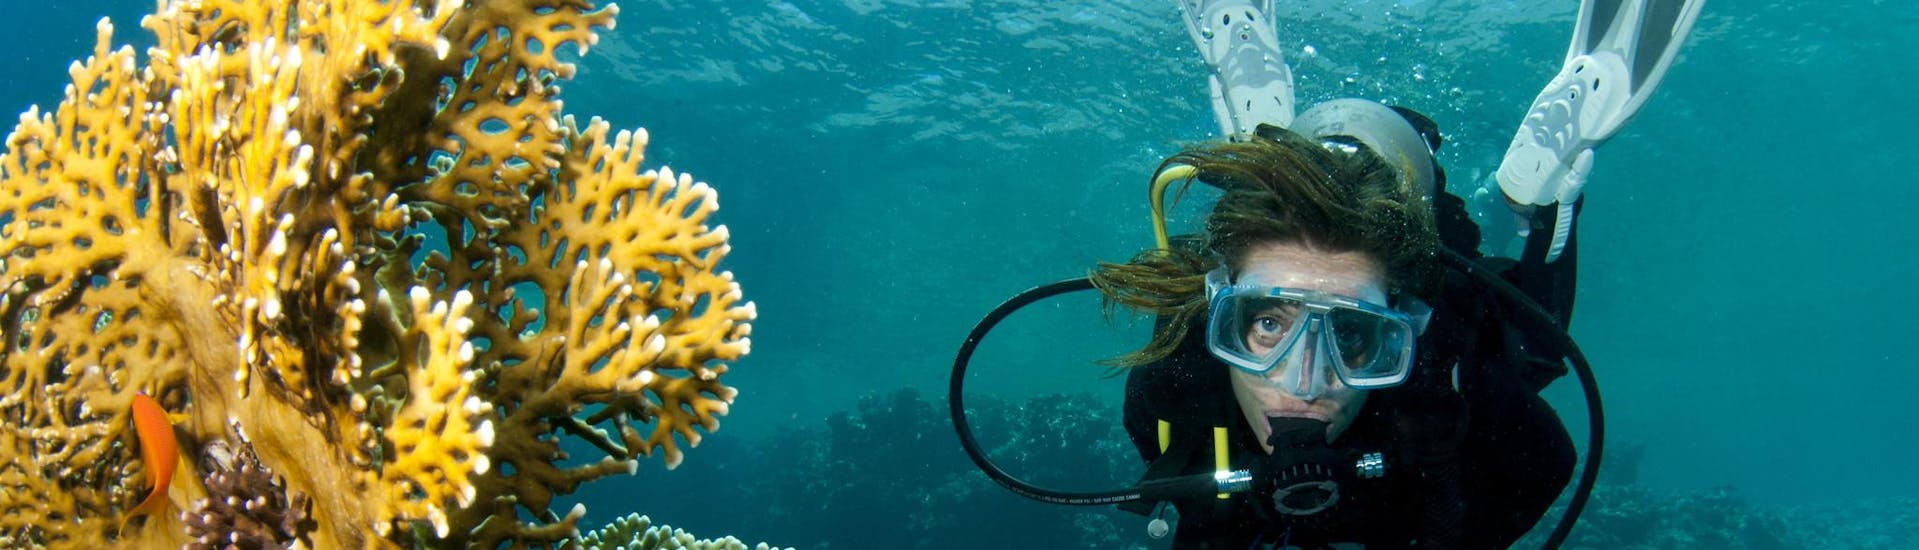 A woman having fun during an activity of scuba diving in reefs and corals.